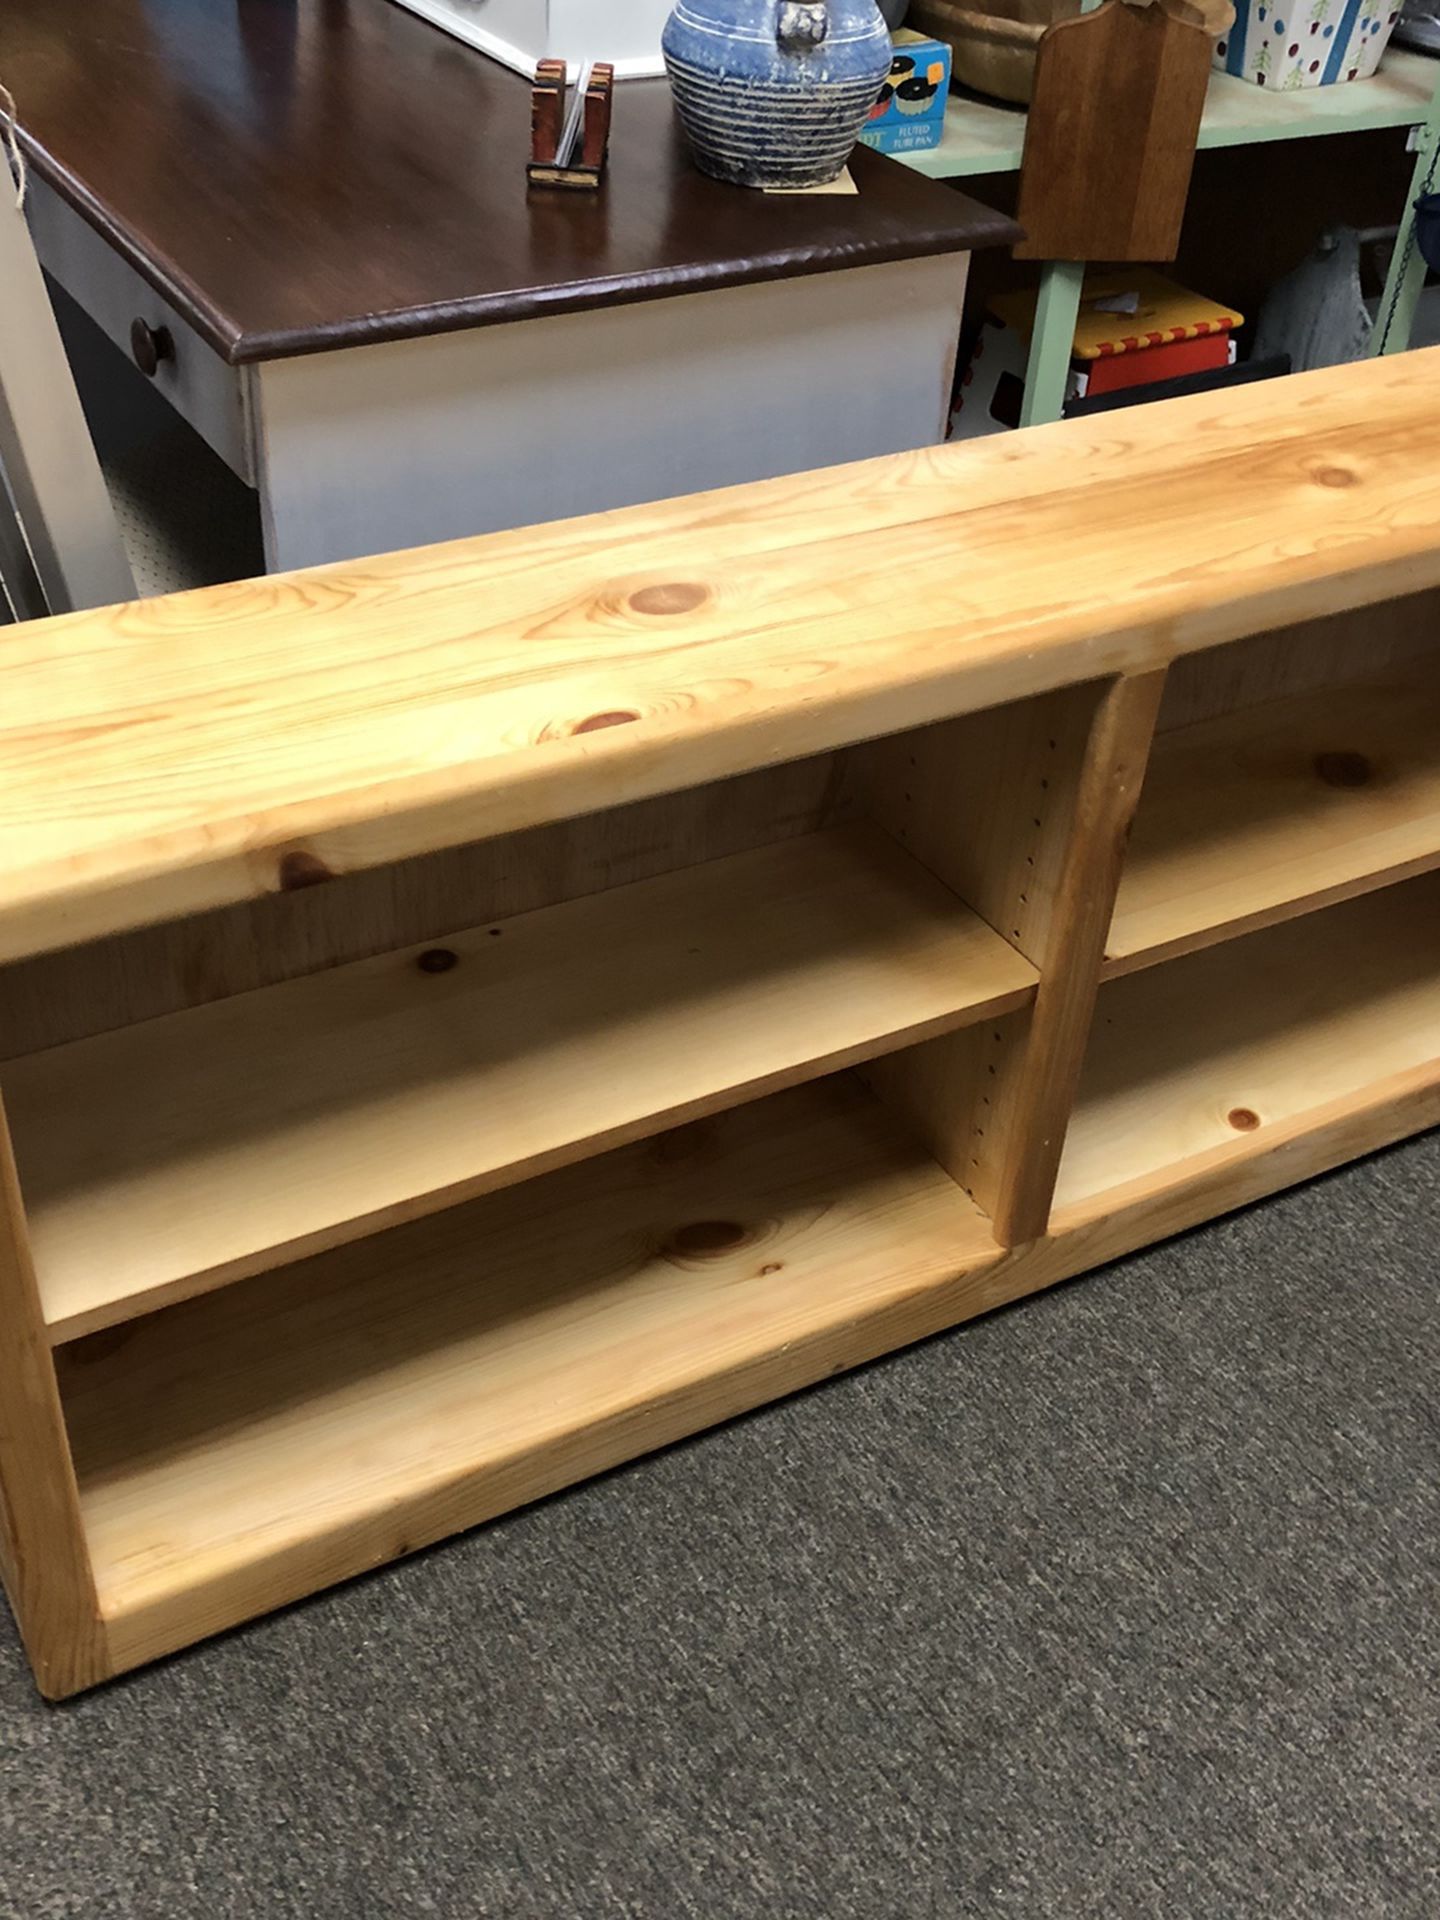 Solid Pine Handcrafted Low Bookshelves/10x60x25